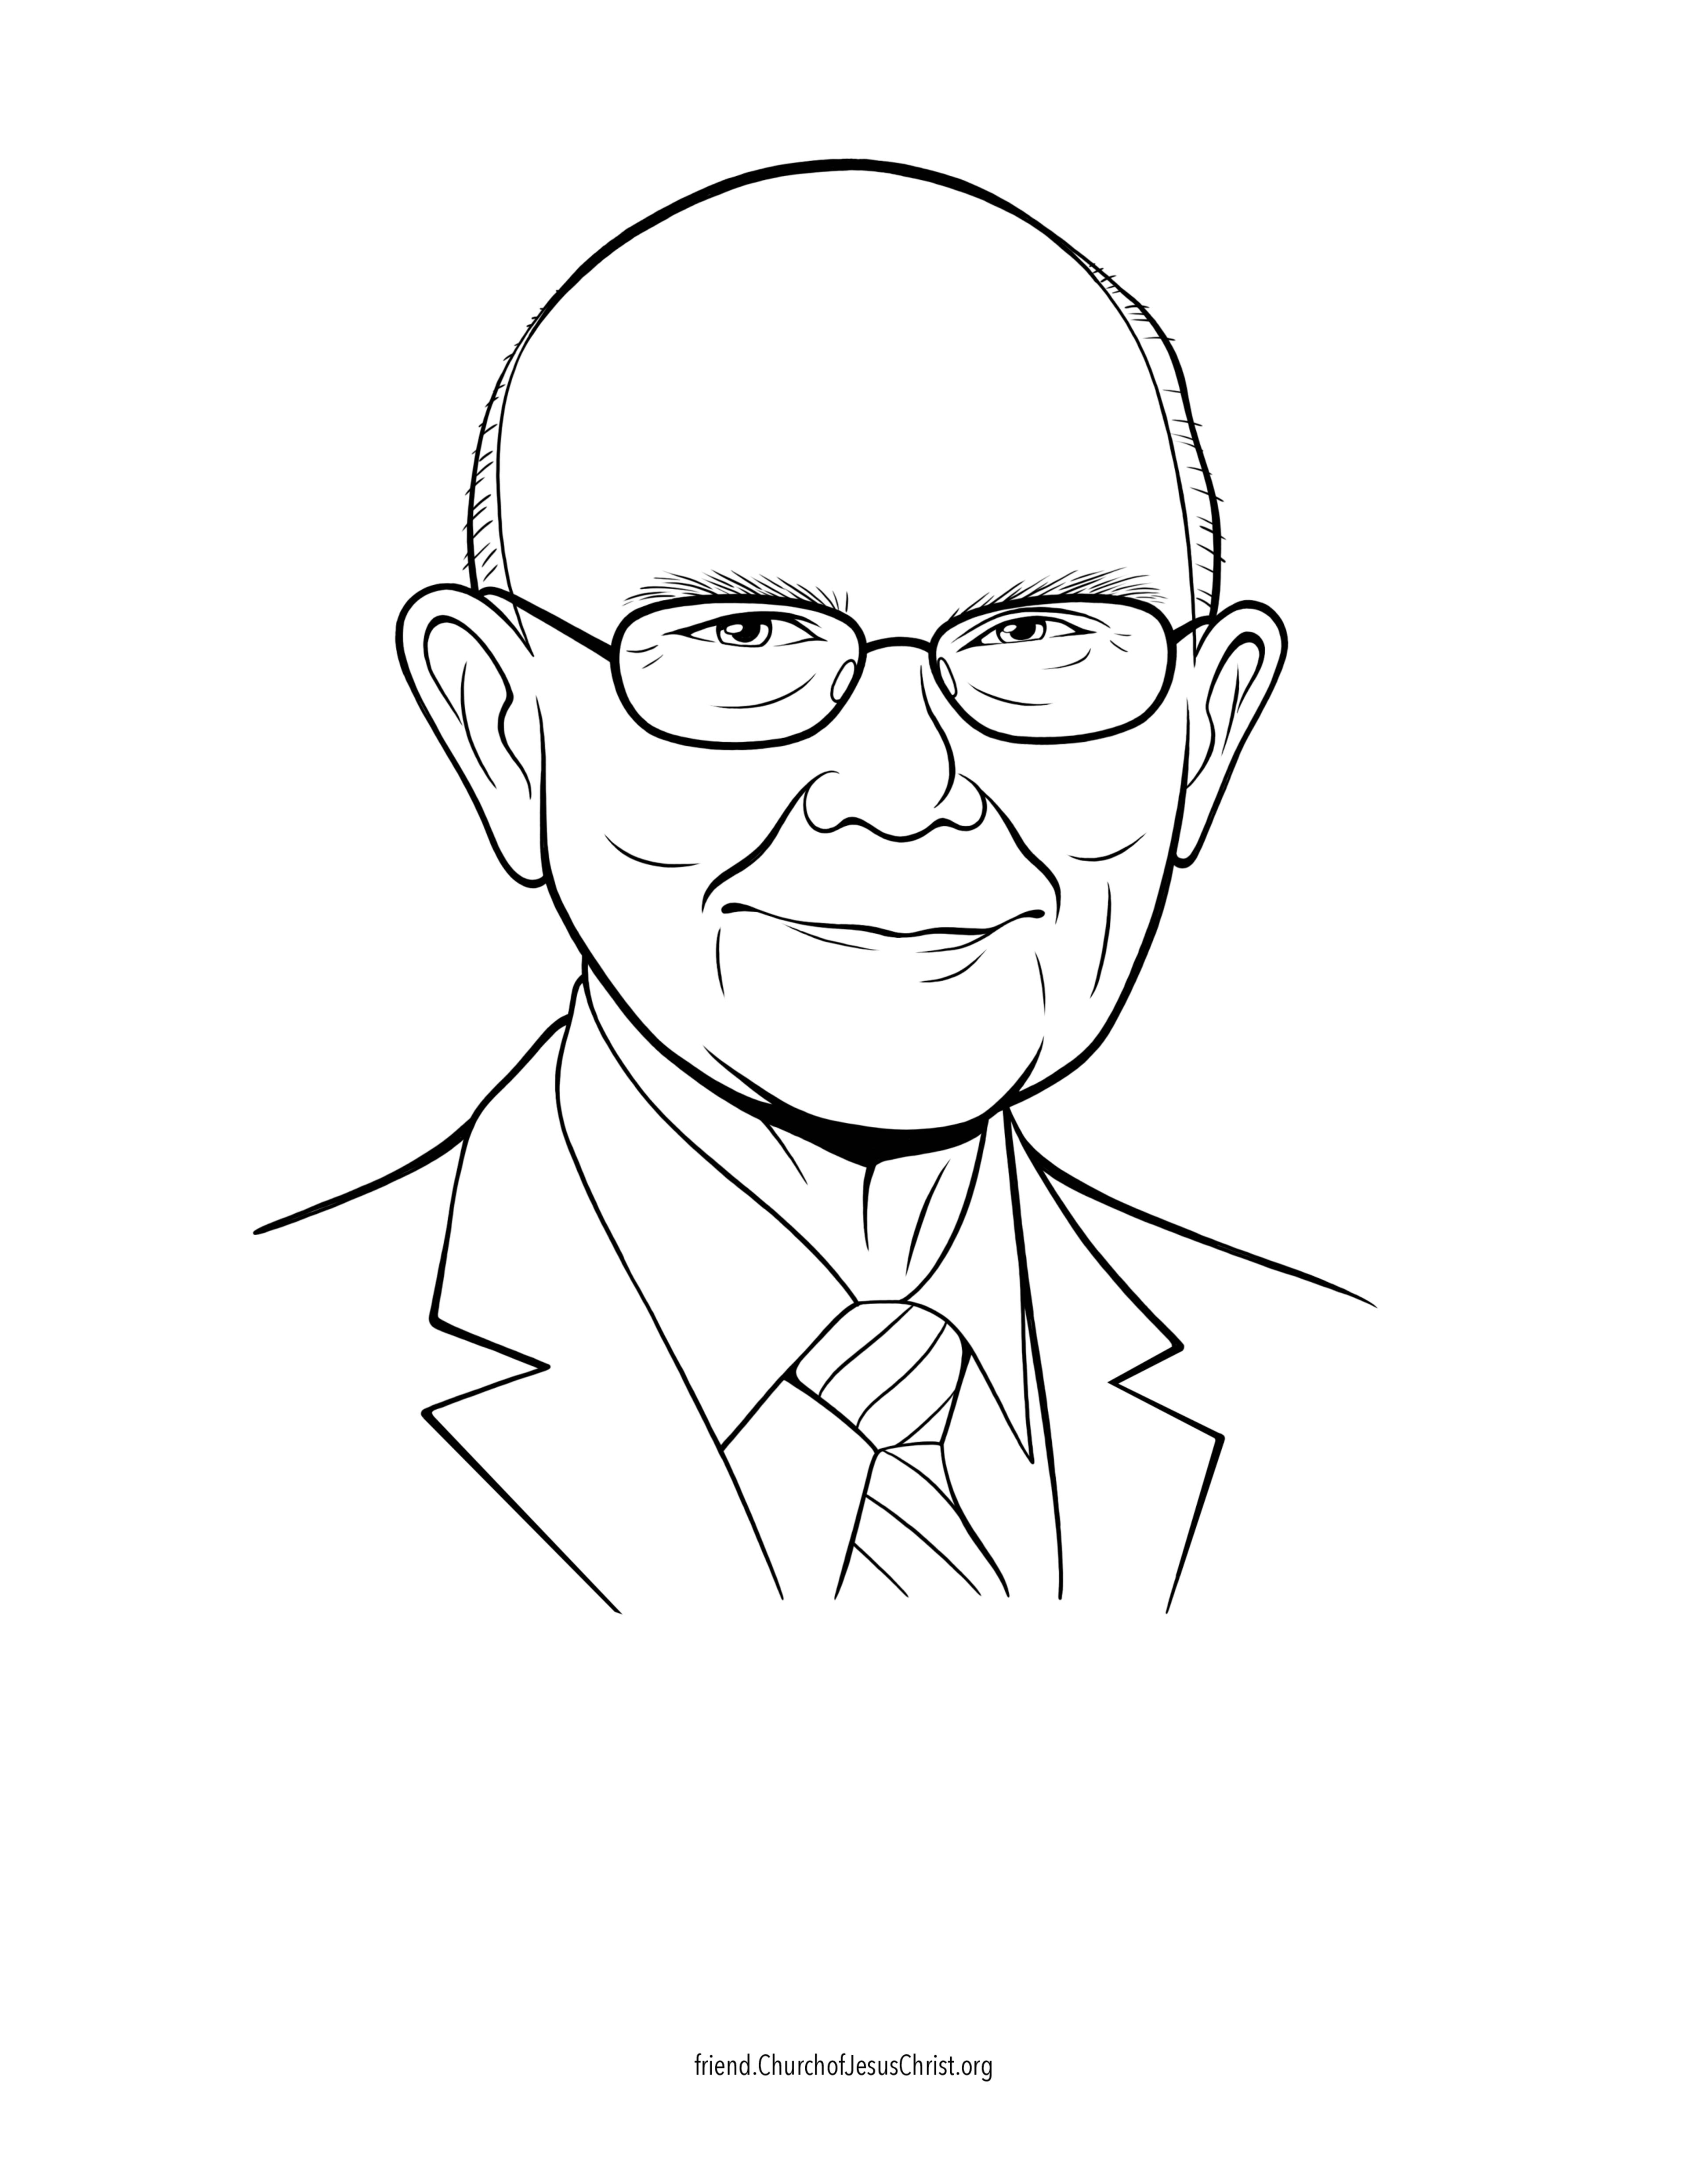 A coloring page of the official portrait of Dallin H. Oaks.